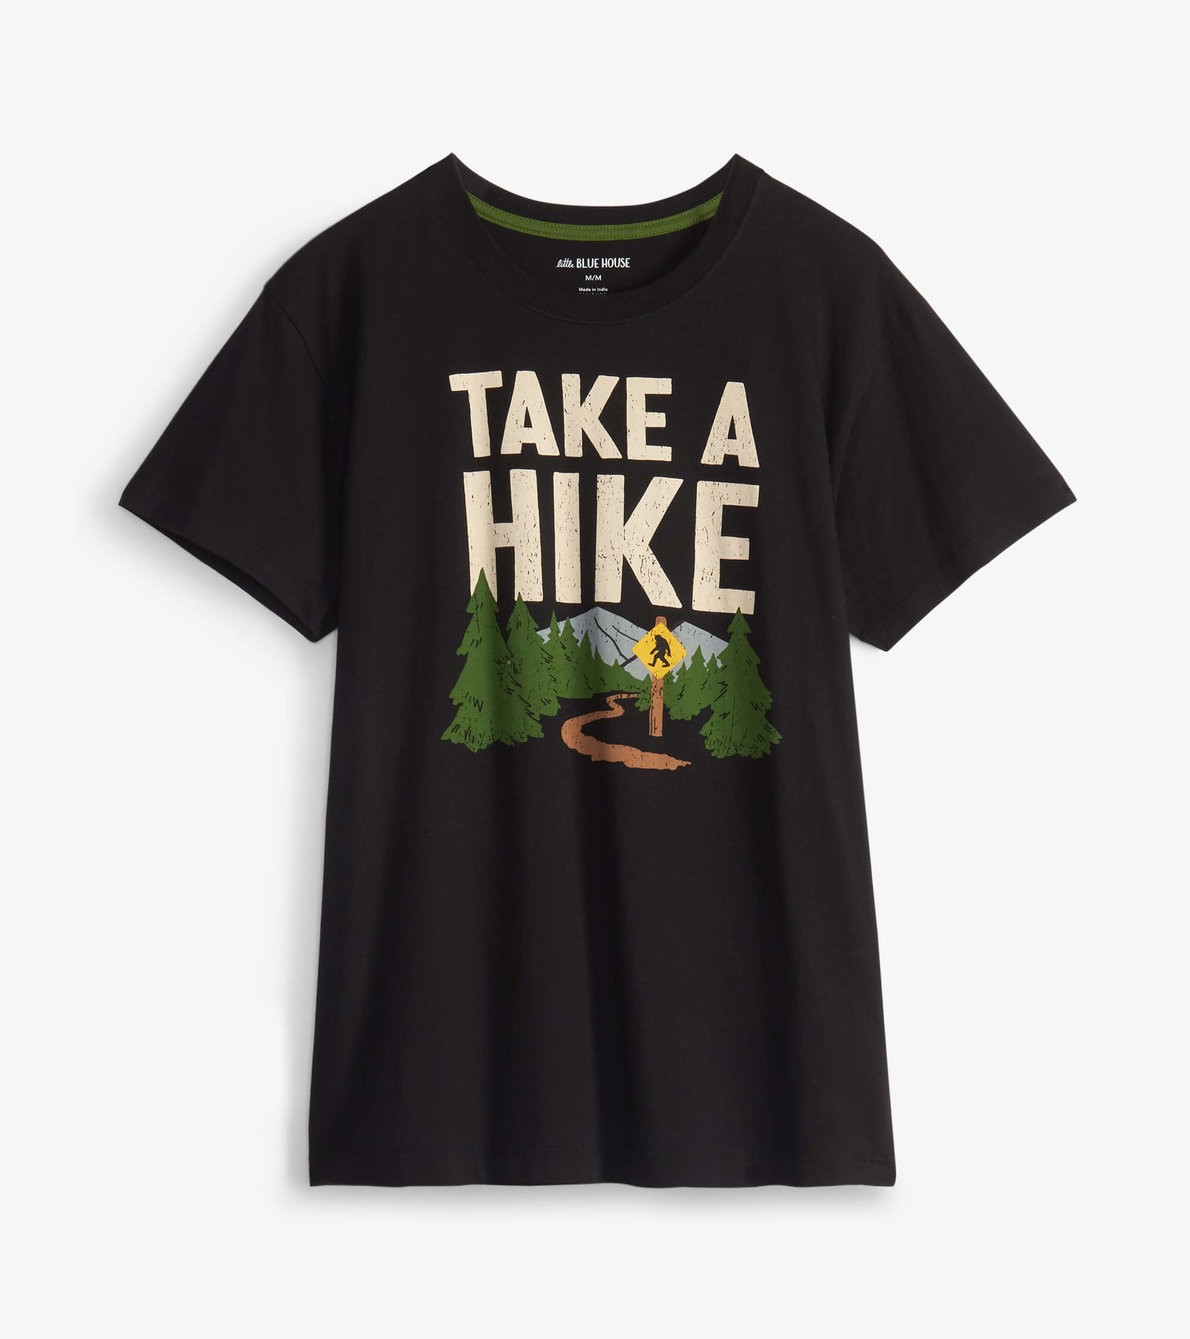 View larger image of Take A Hike Men's Tee